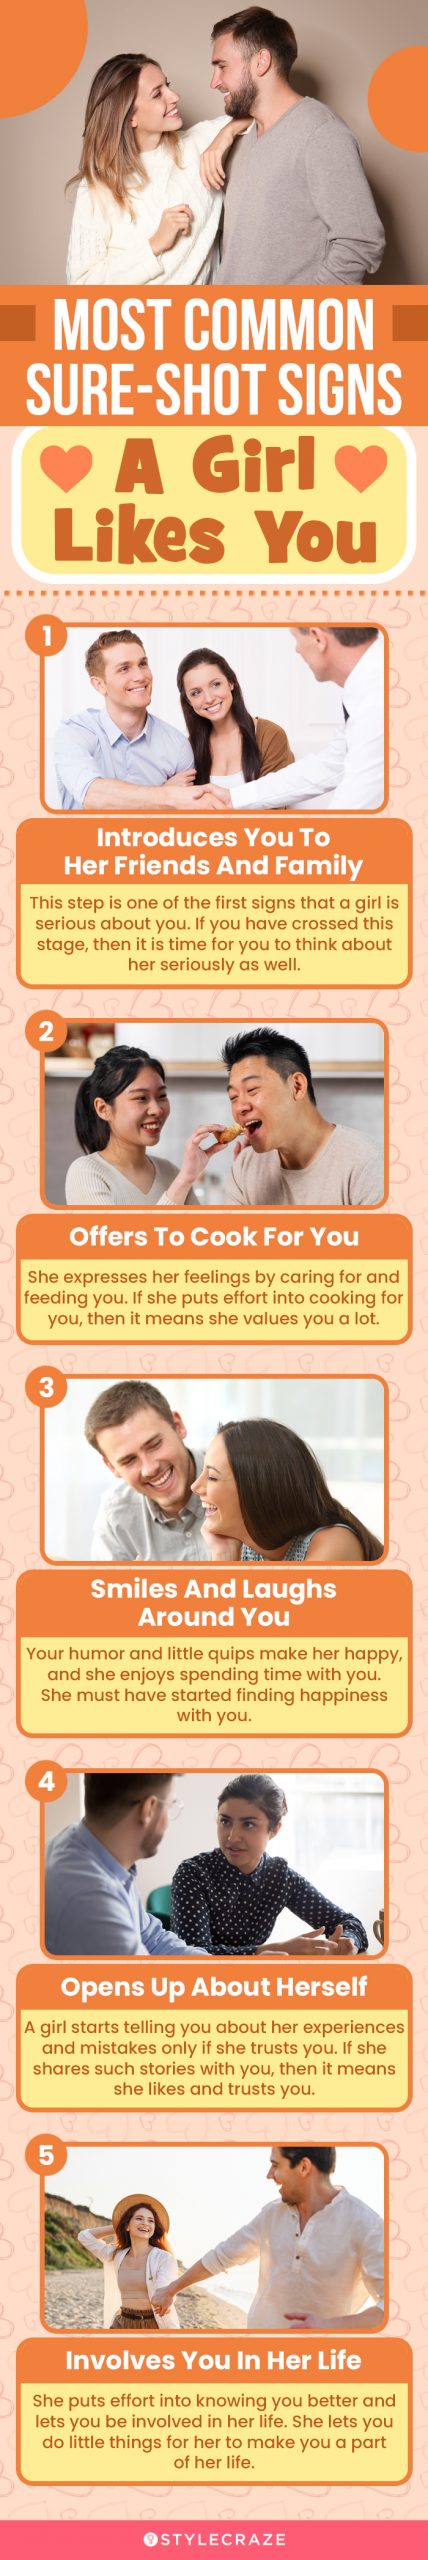 Is She The One For Me? 25 Signs To Help You Find Out